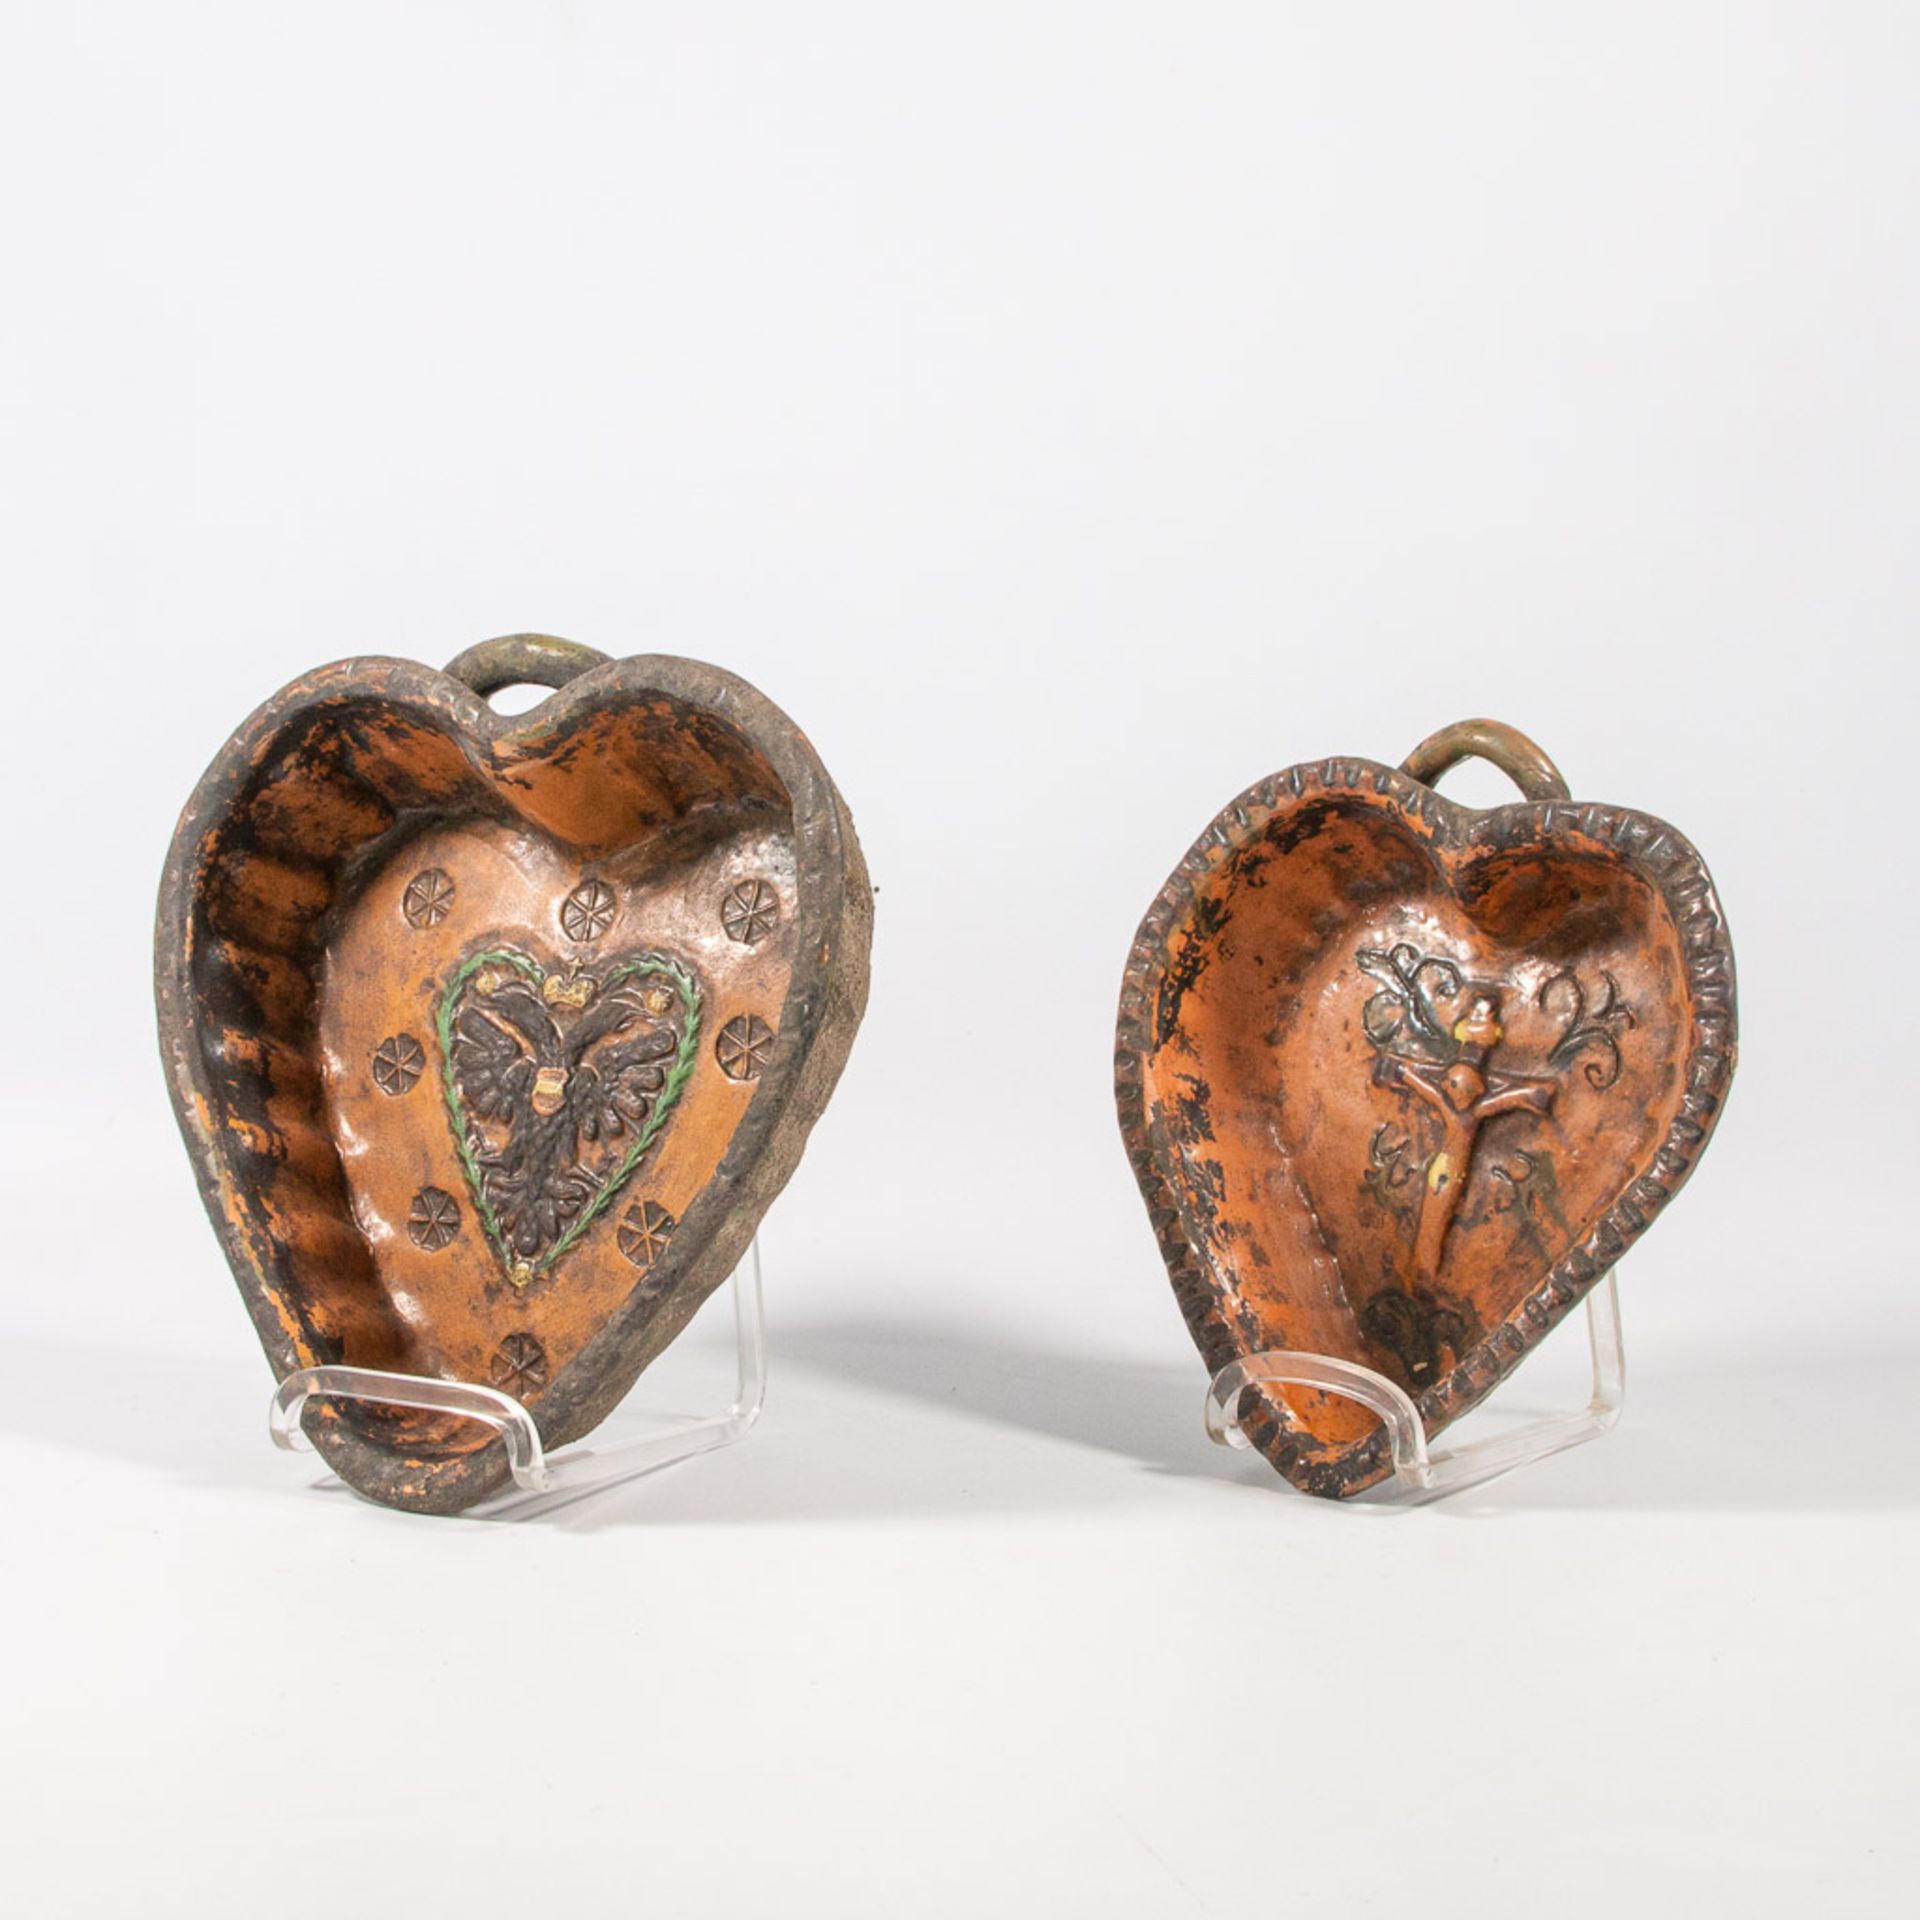 A Collection of 2 baking forms in shape of a heart - Image 6 of 27